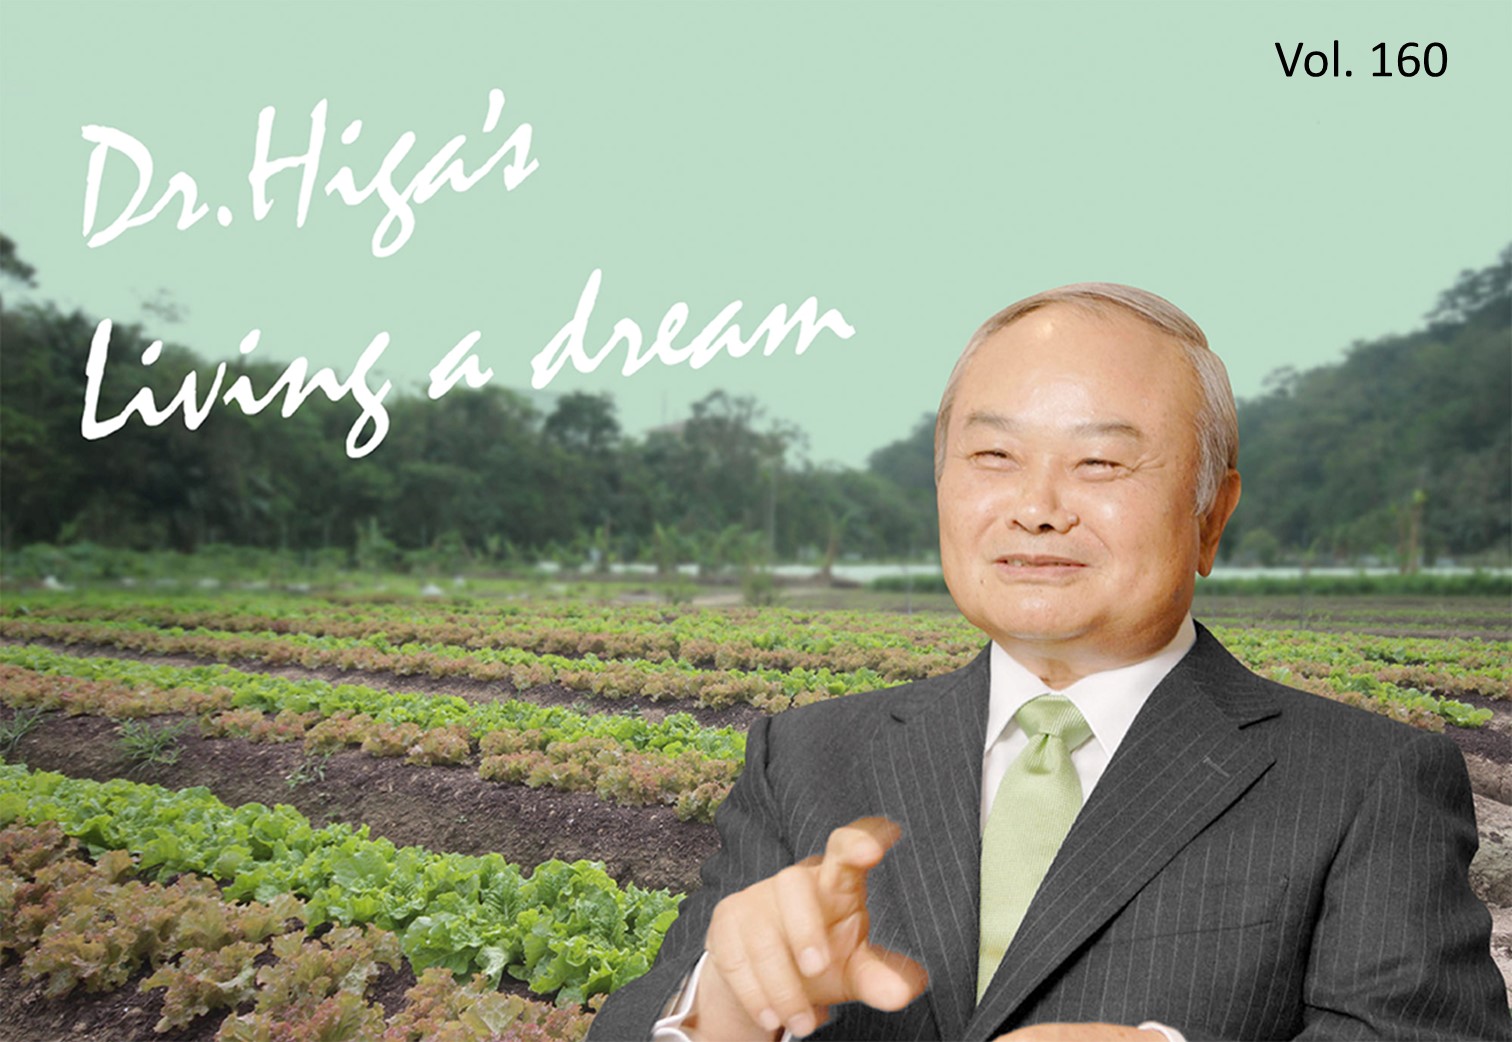 Dr. Higa's "Living a Dream": The latest article #160 is up!